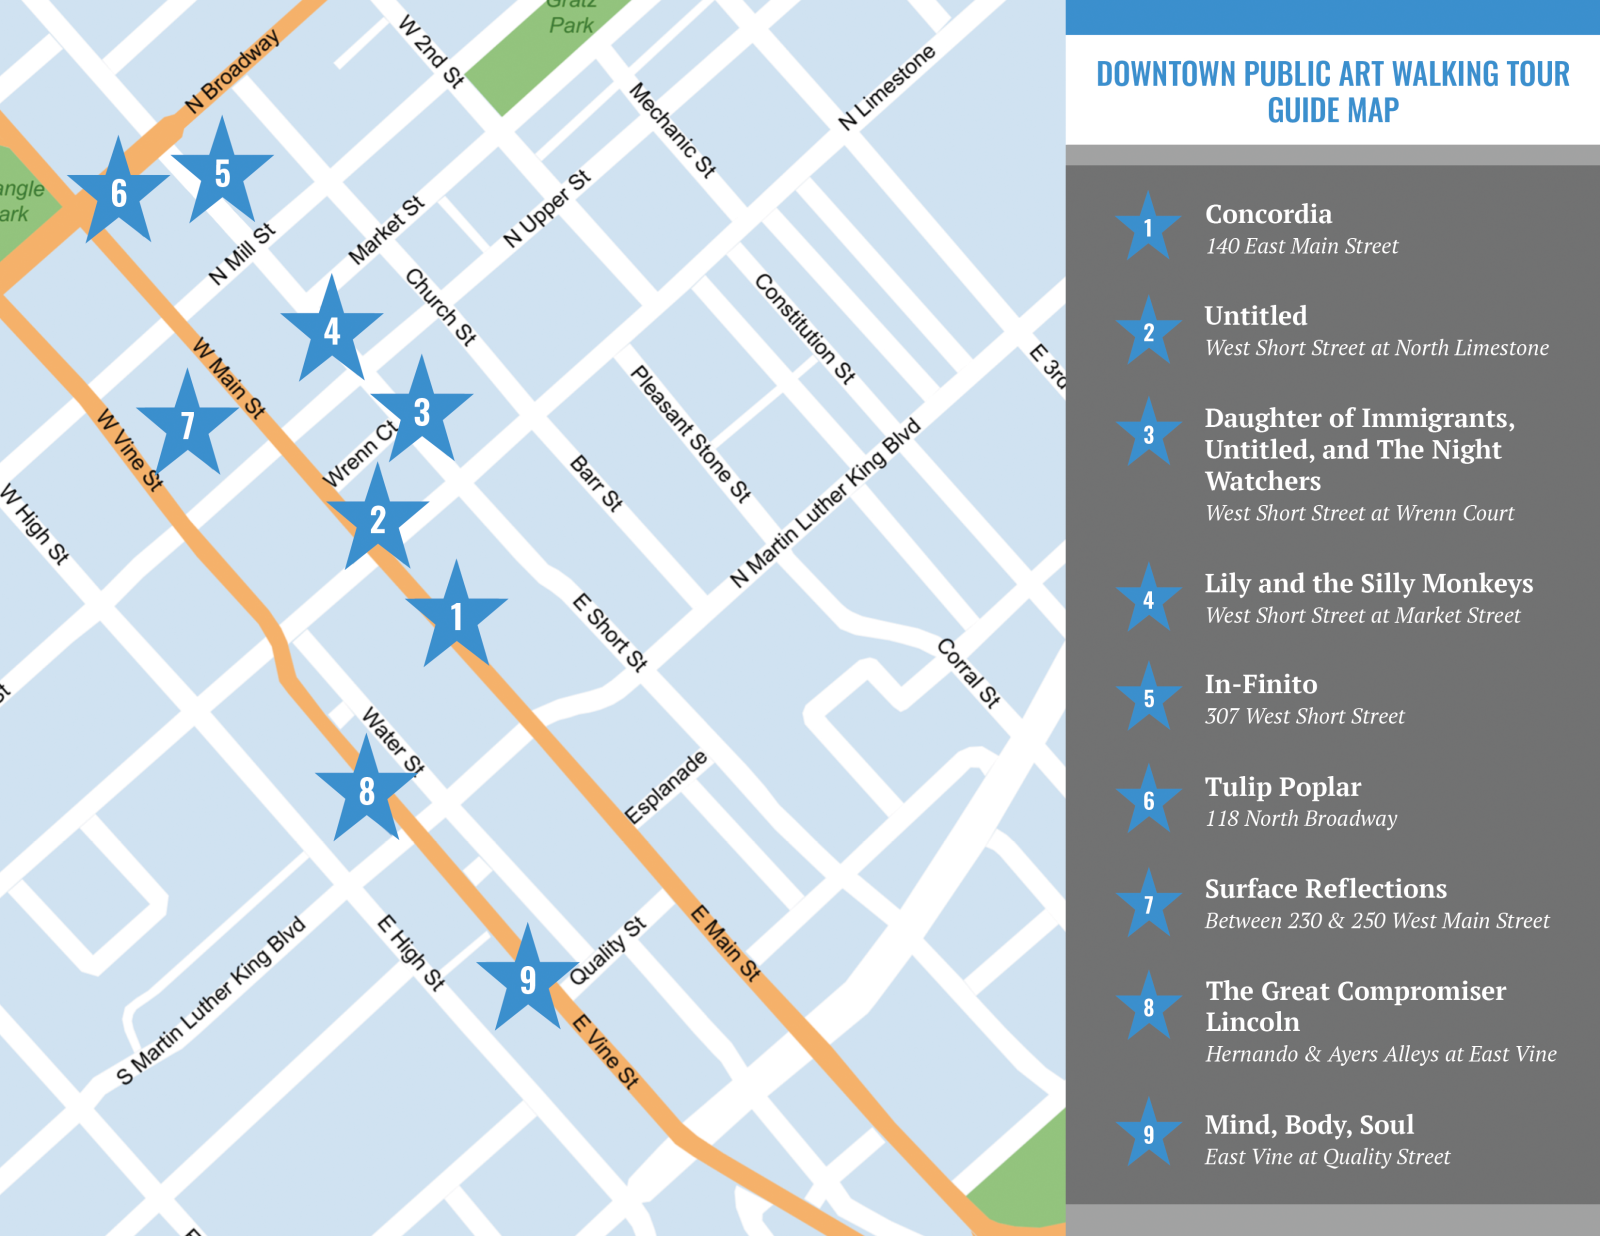 walking tour map with blue stars representing the stops and a list of stops on the right hand side